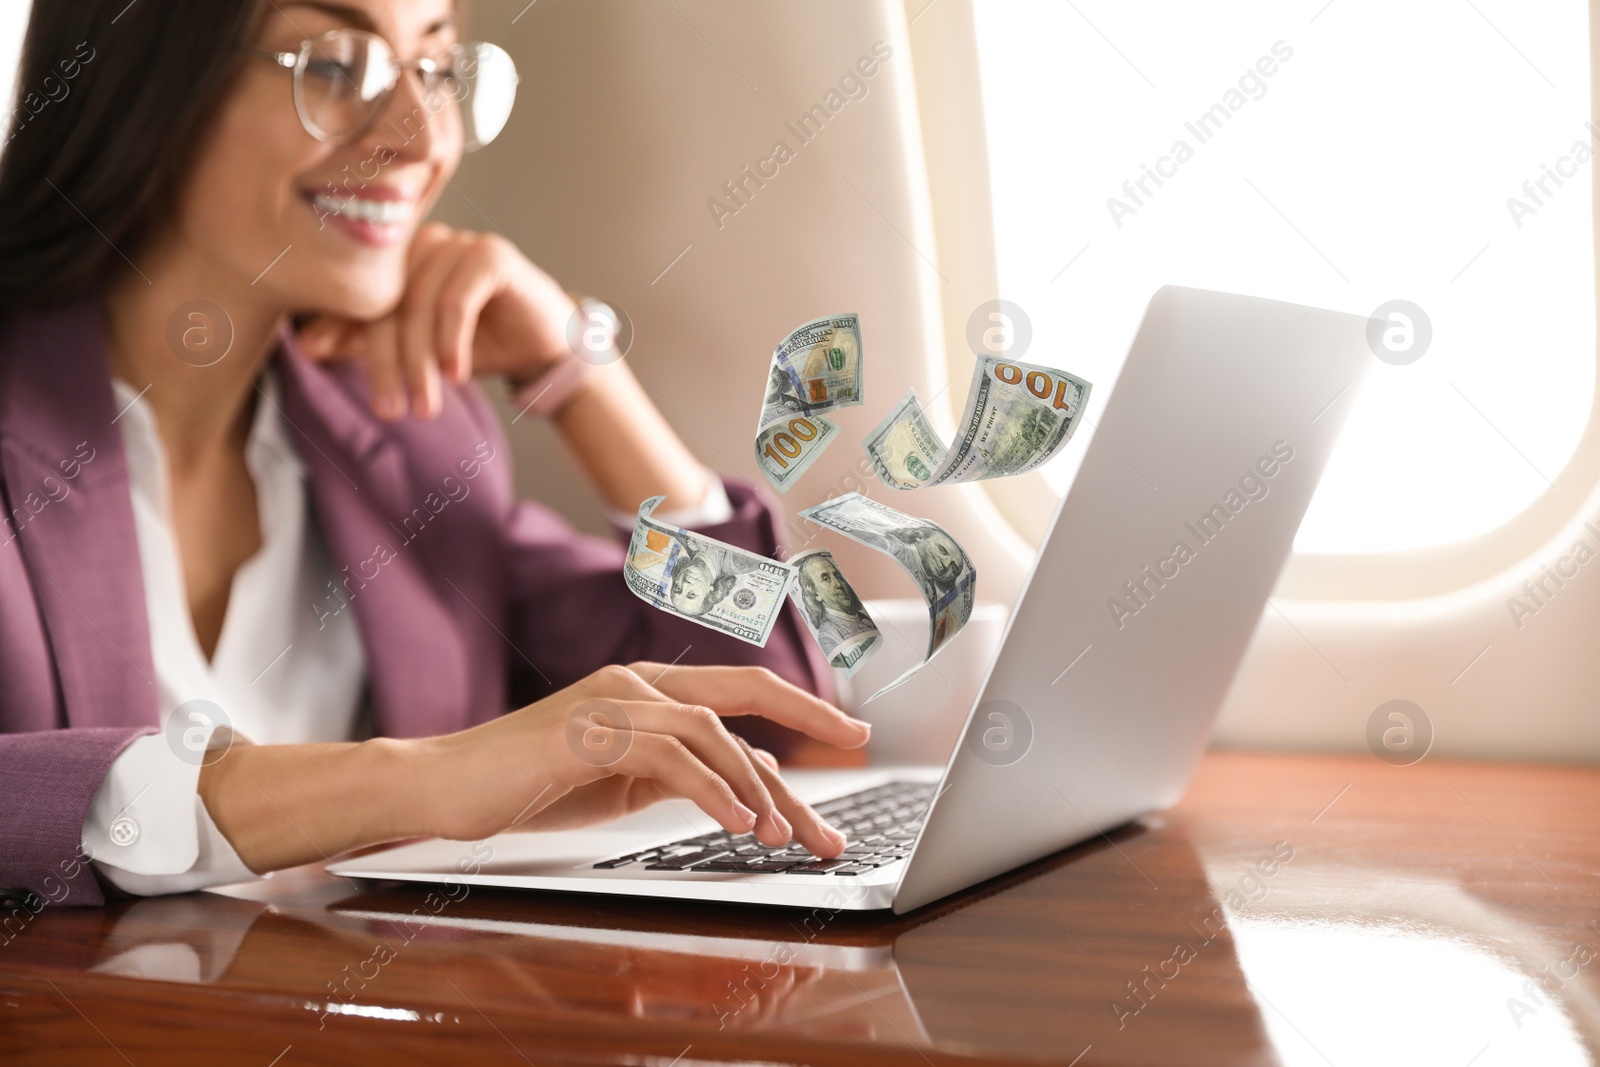 Image of Making money online. Woman using laptop at table and flying dollars